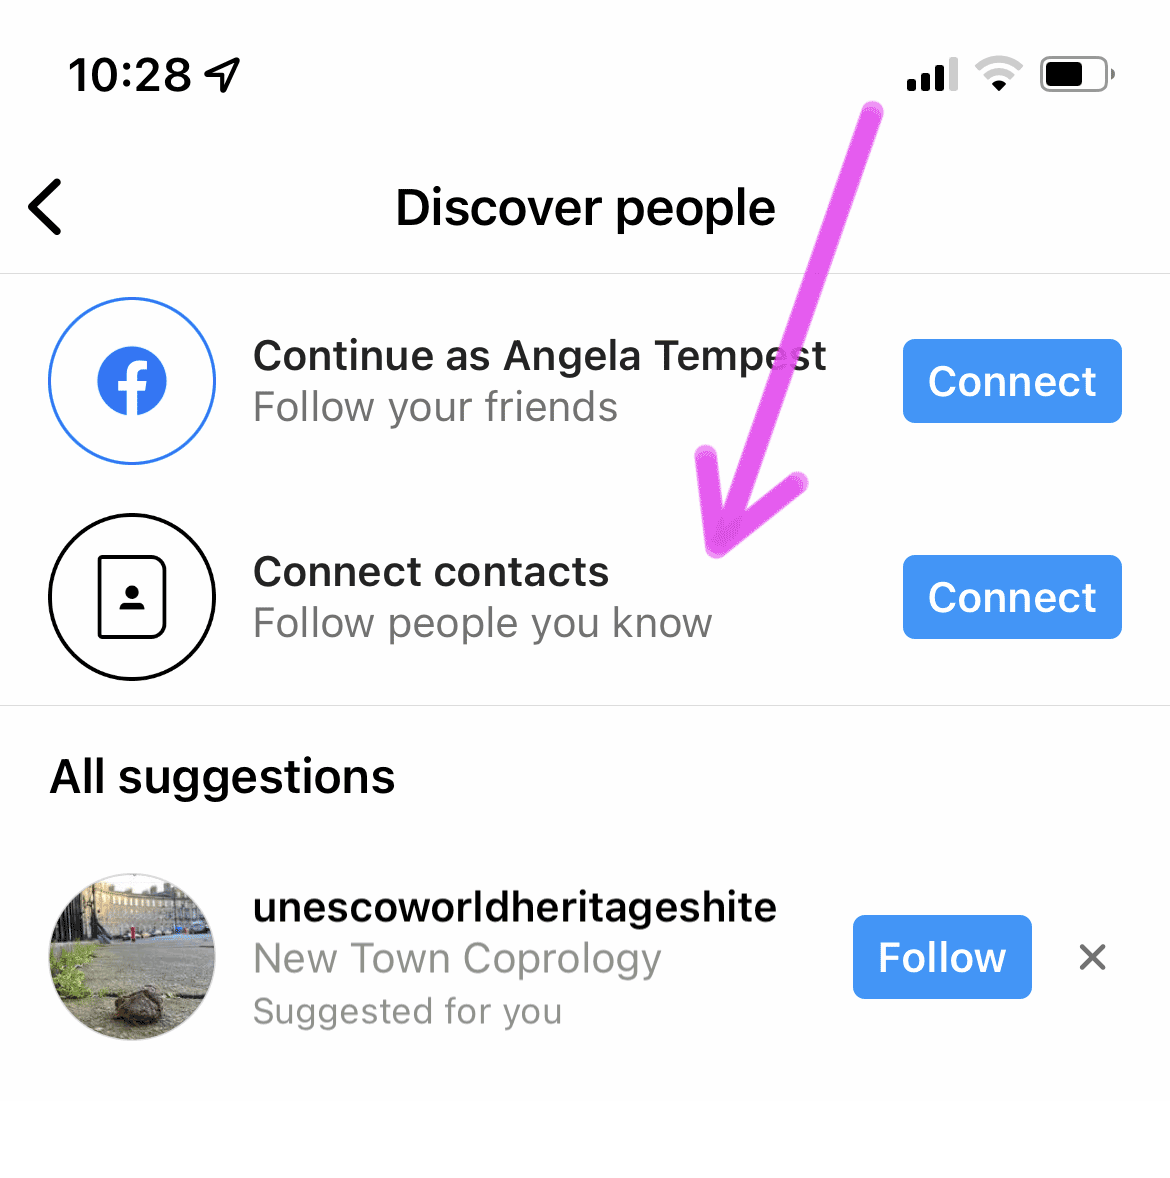 blue connect button under connect contacts.